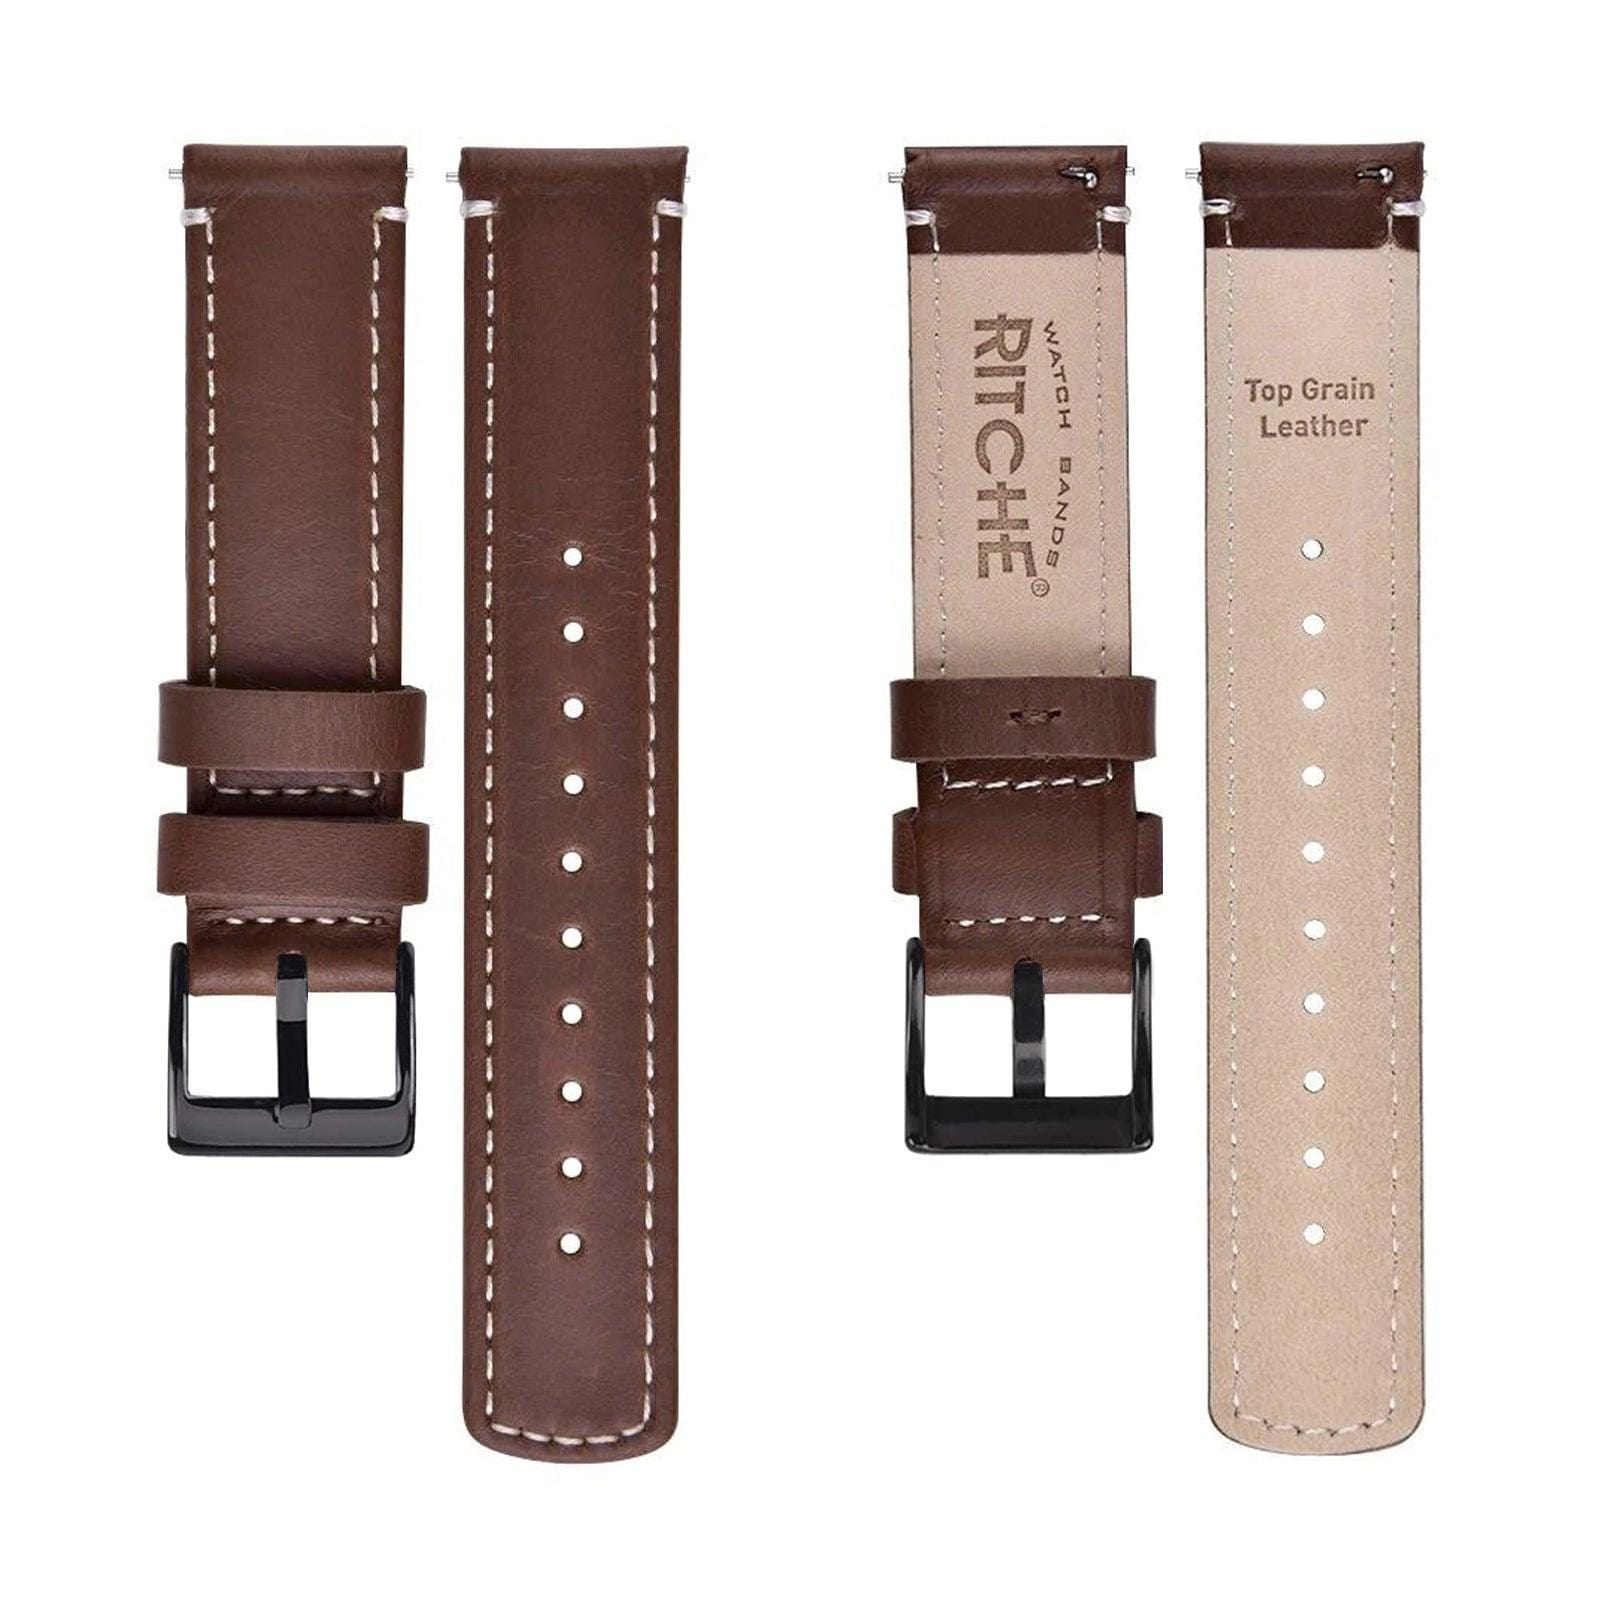 Top Grain Leather Band in Dark Brown Quick Release